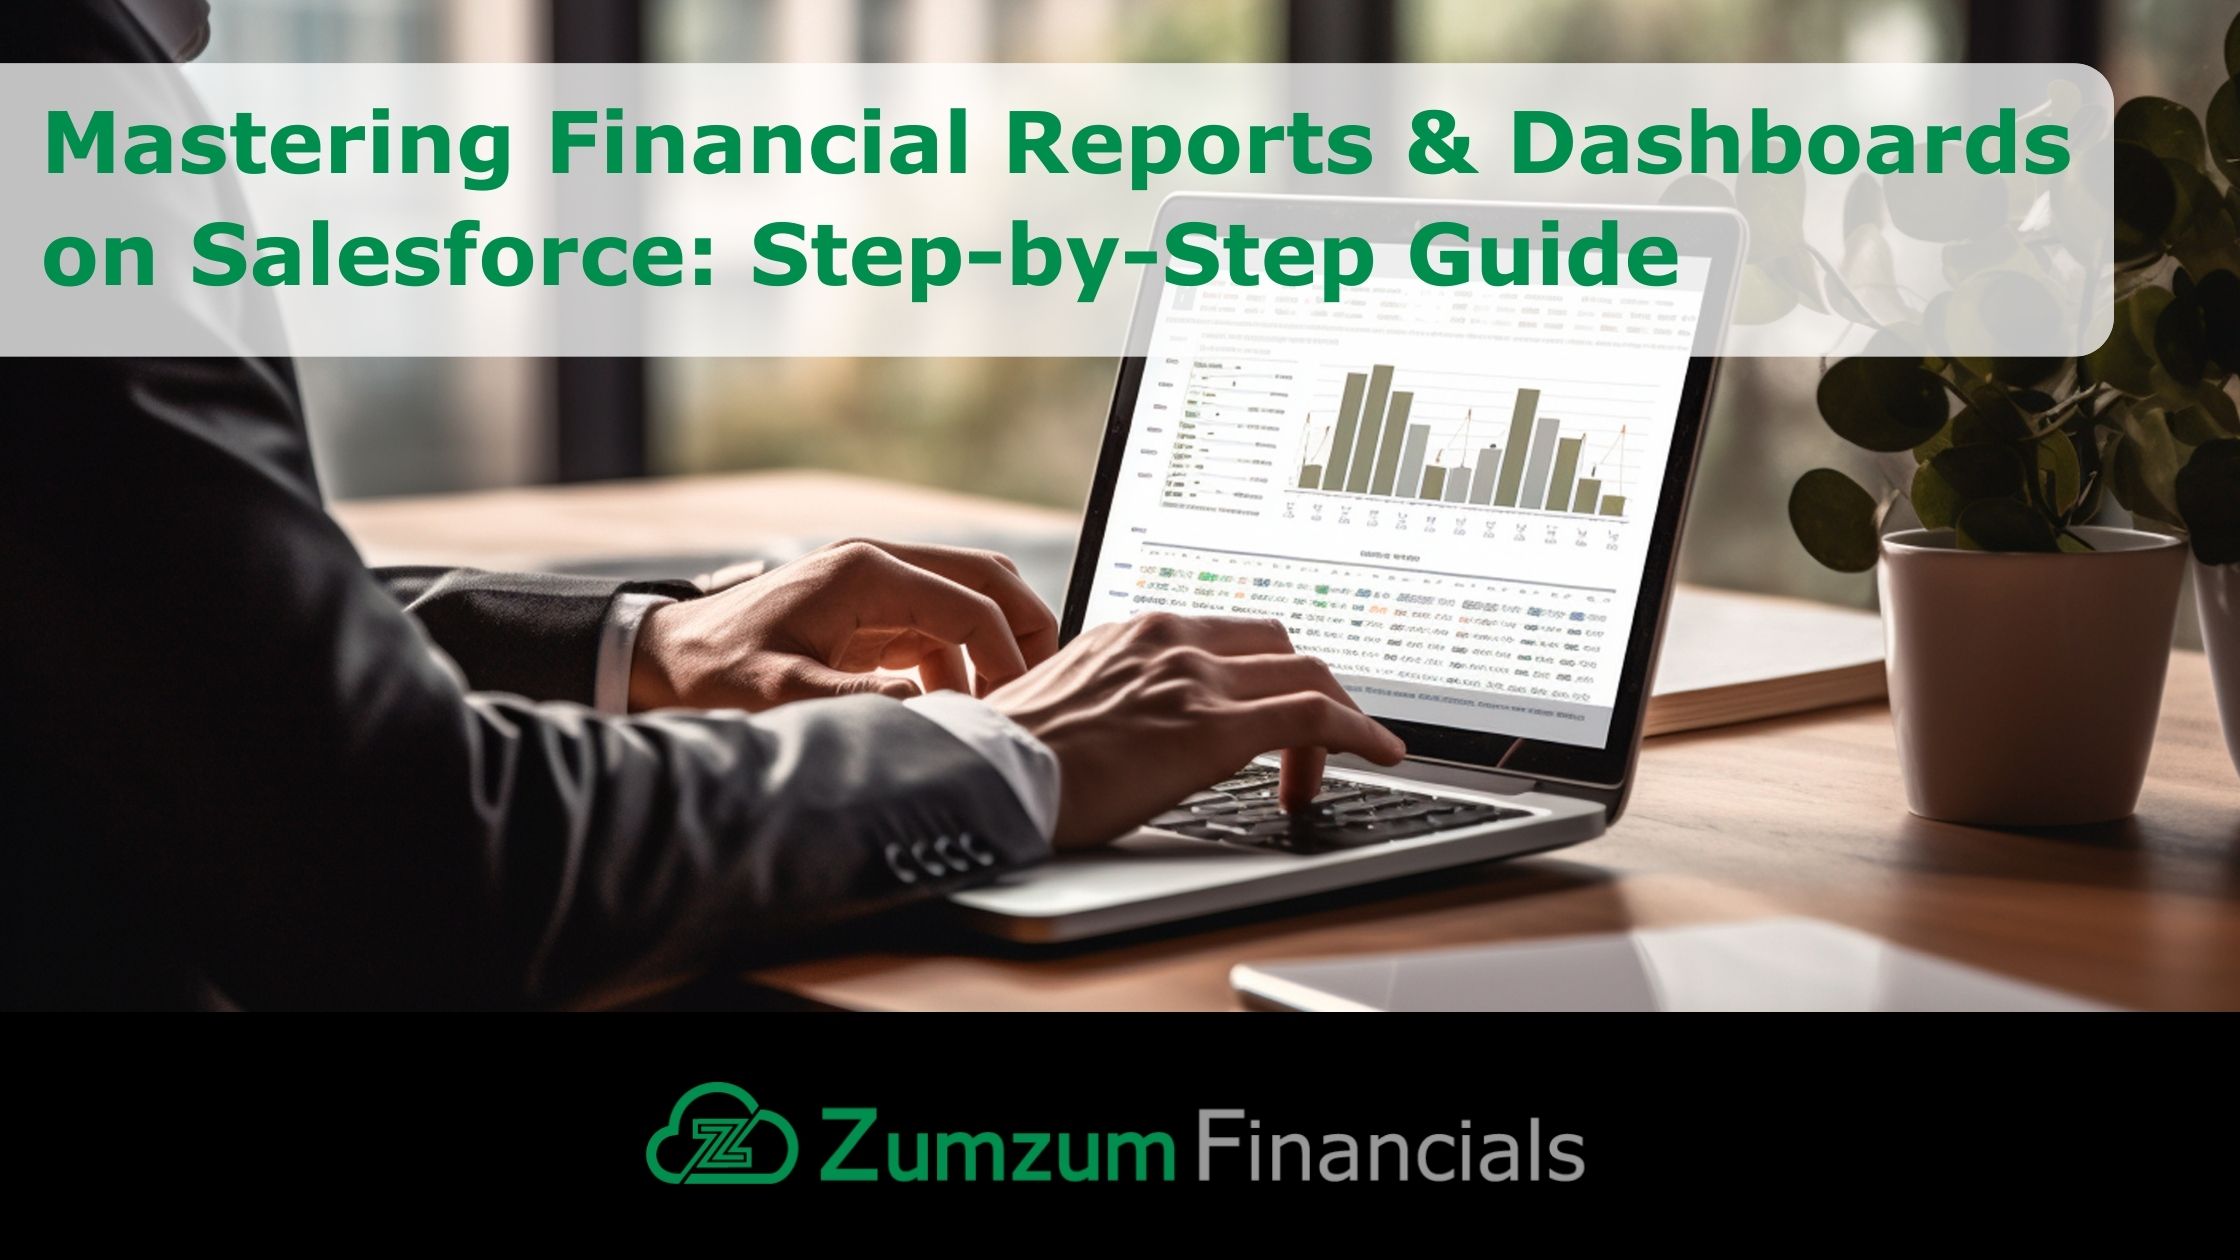 Mastering Financial Reports & Dashboards on Salesforce Step-by-Step Guide